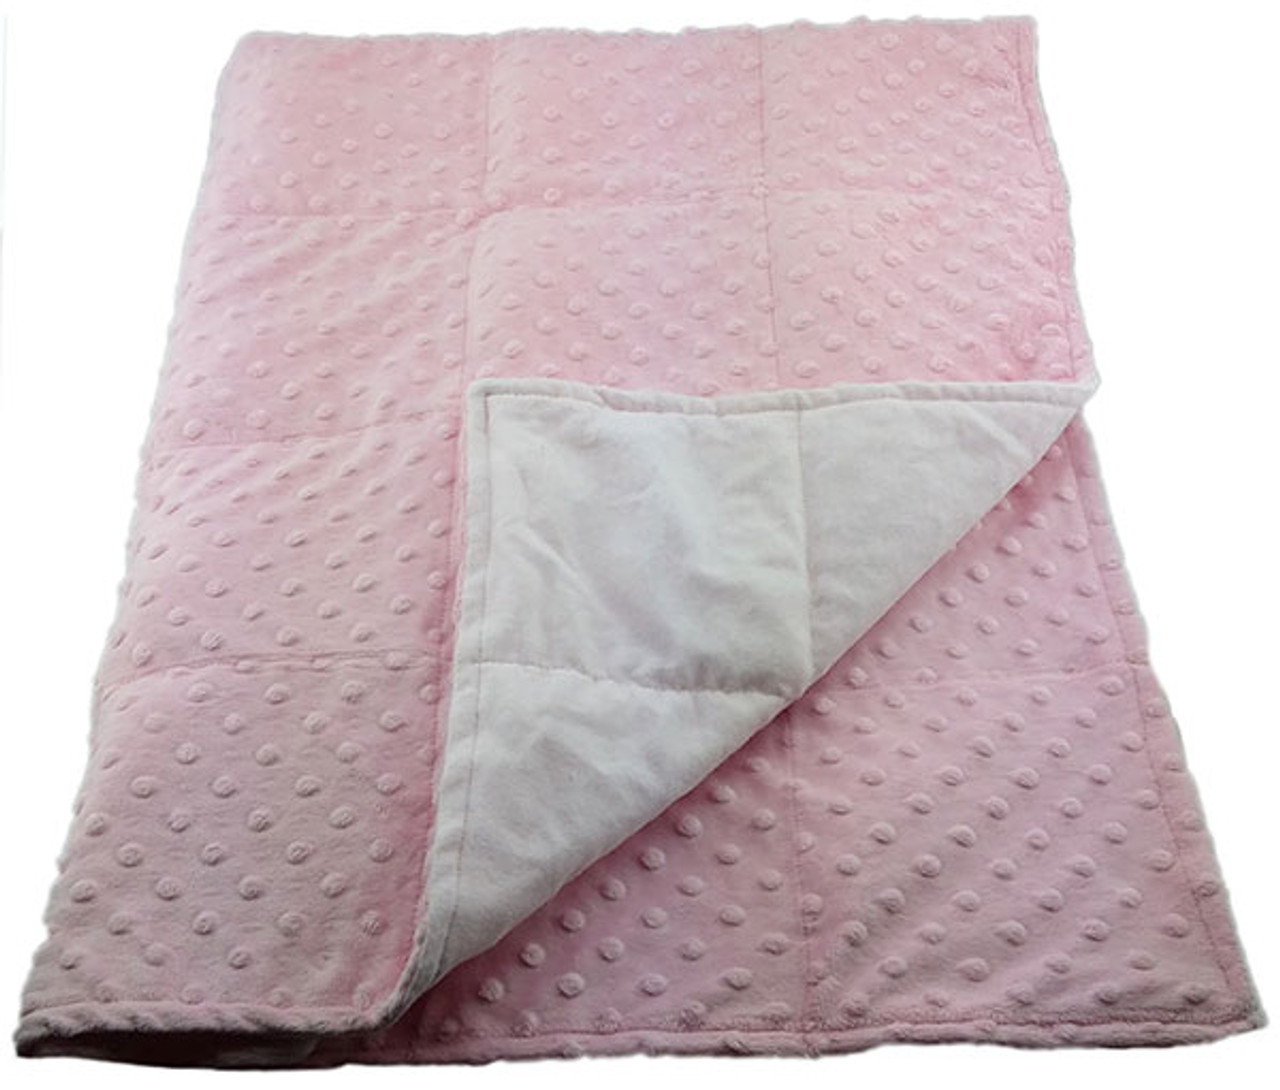 10 LB Weighted Blanket – Pink - Washable - OUTLET SALE